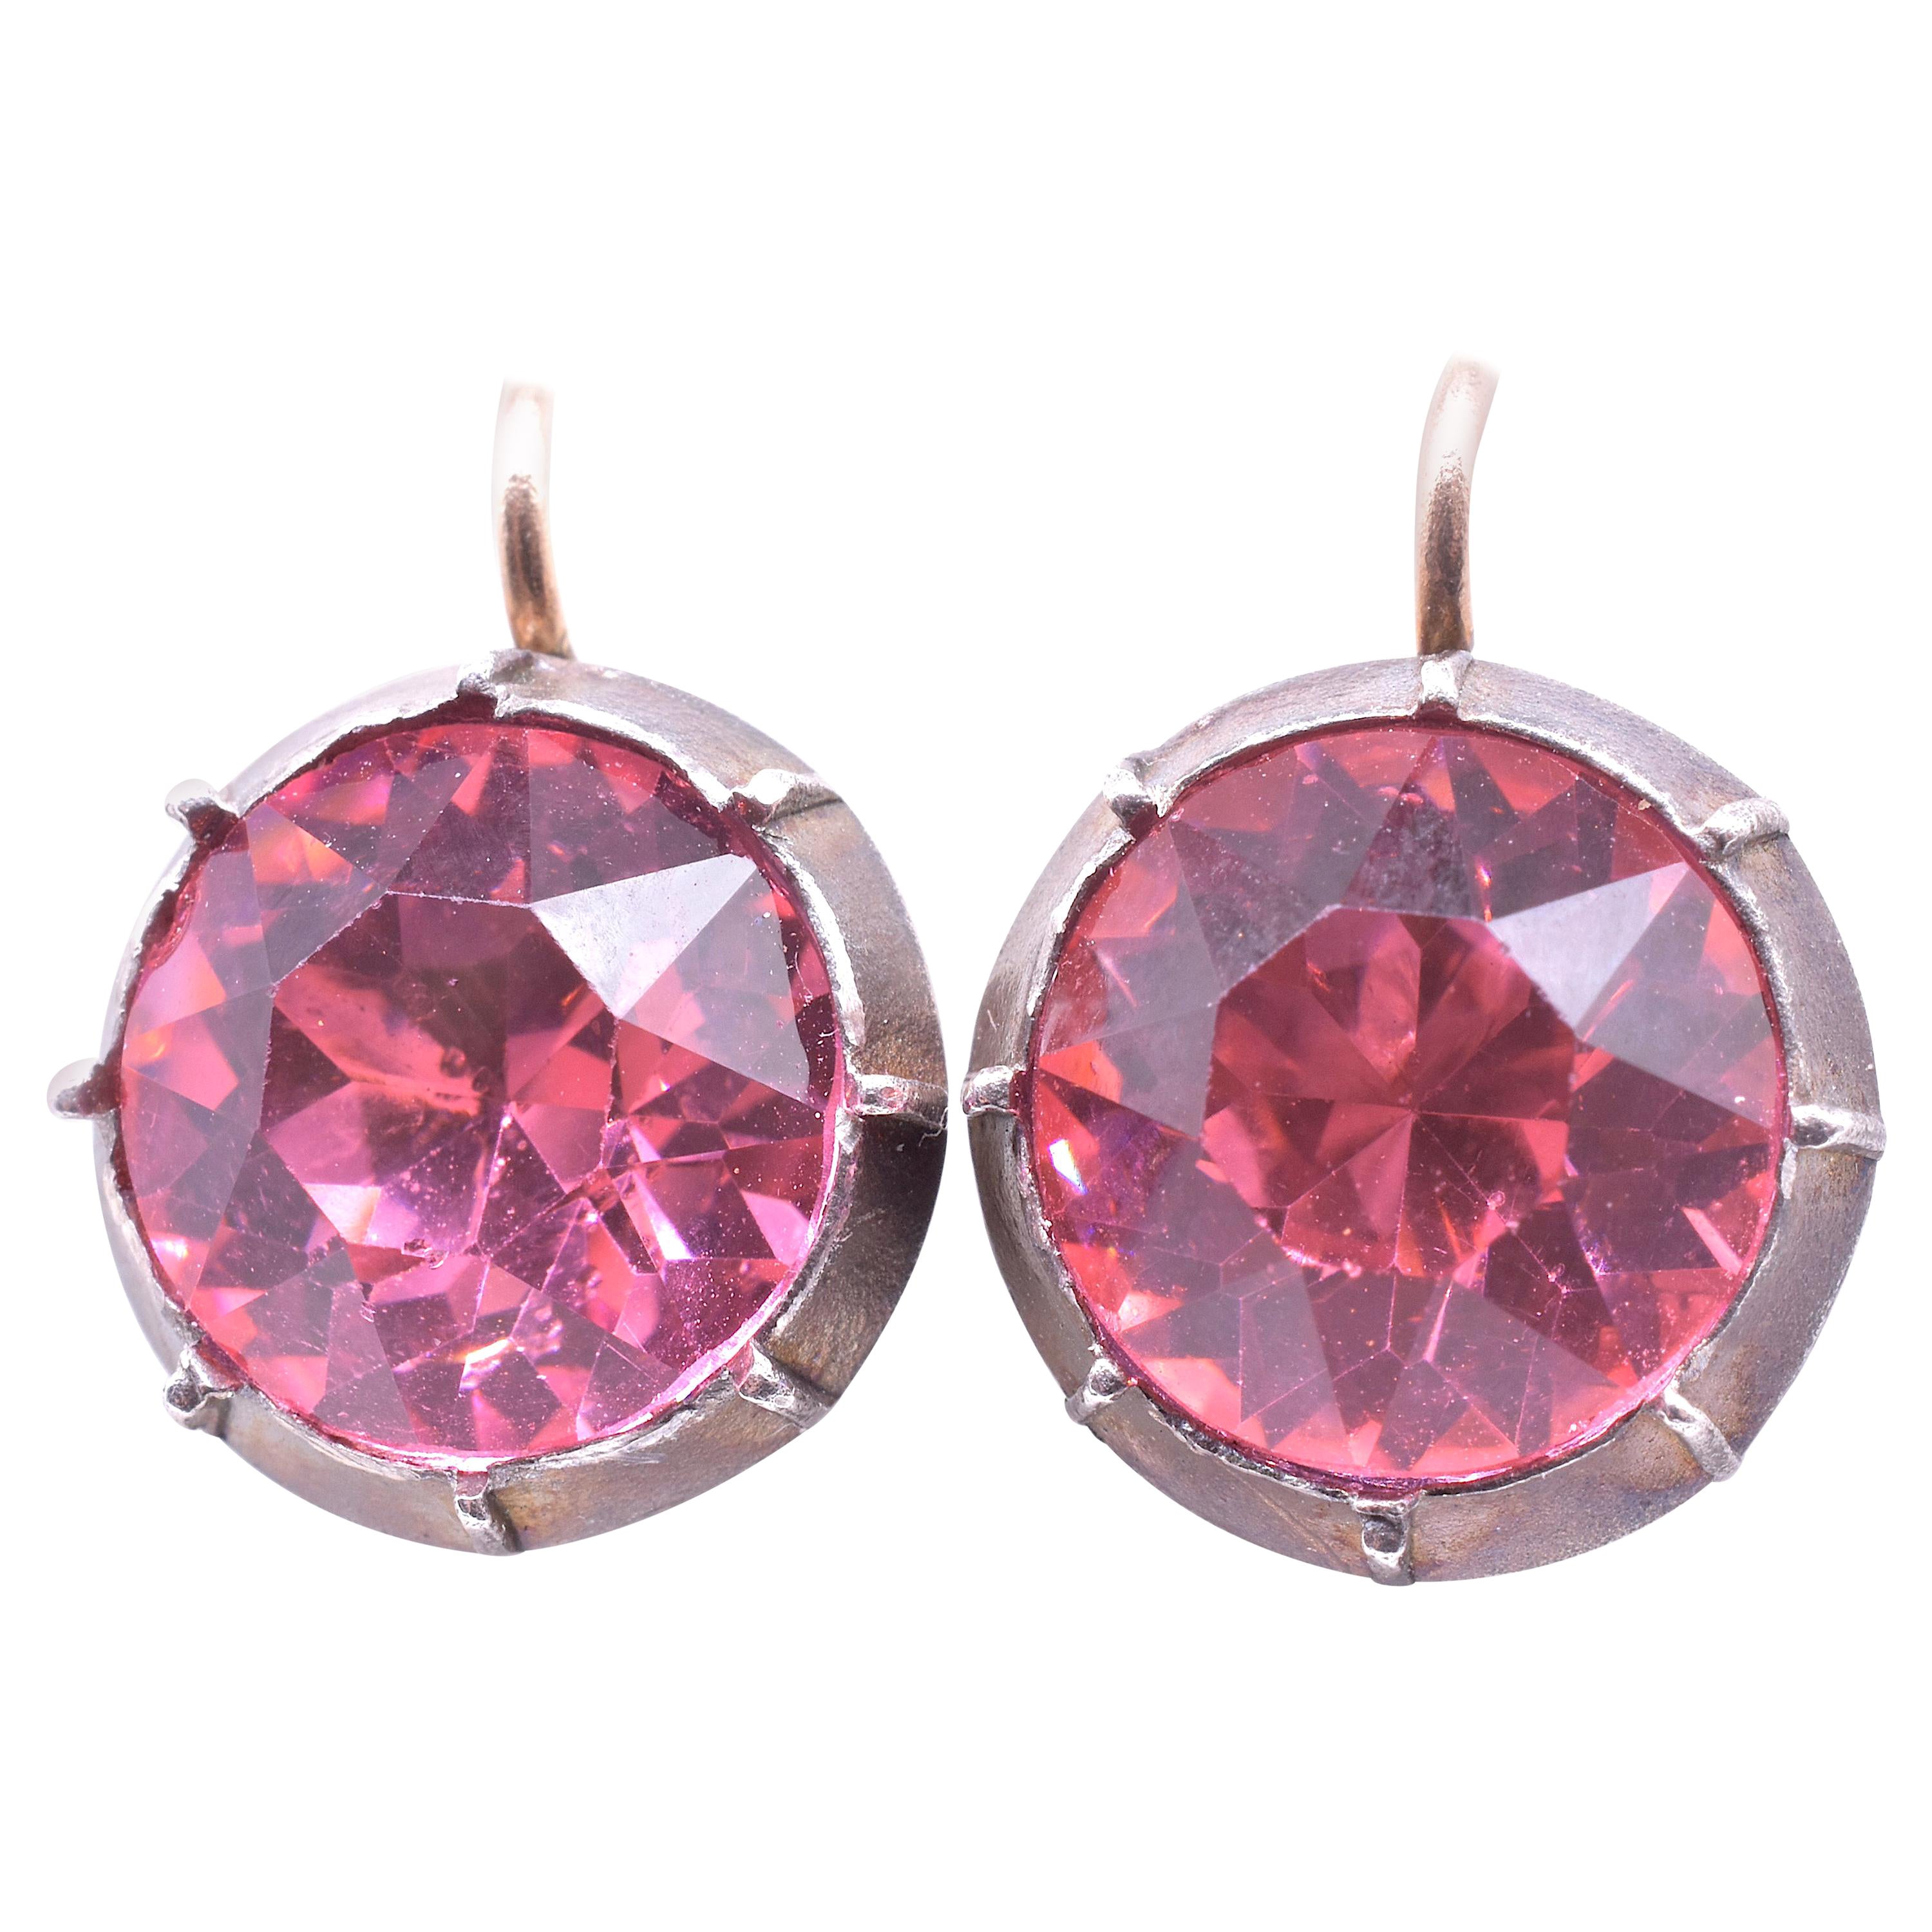 Georgian circa 1820 Round Pink Paste Earrings Backed in Silver